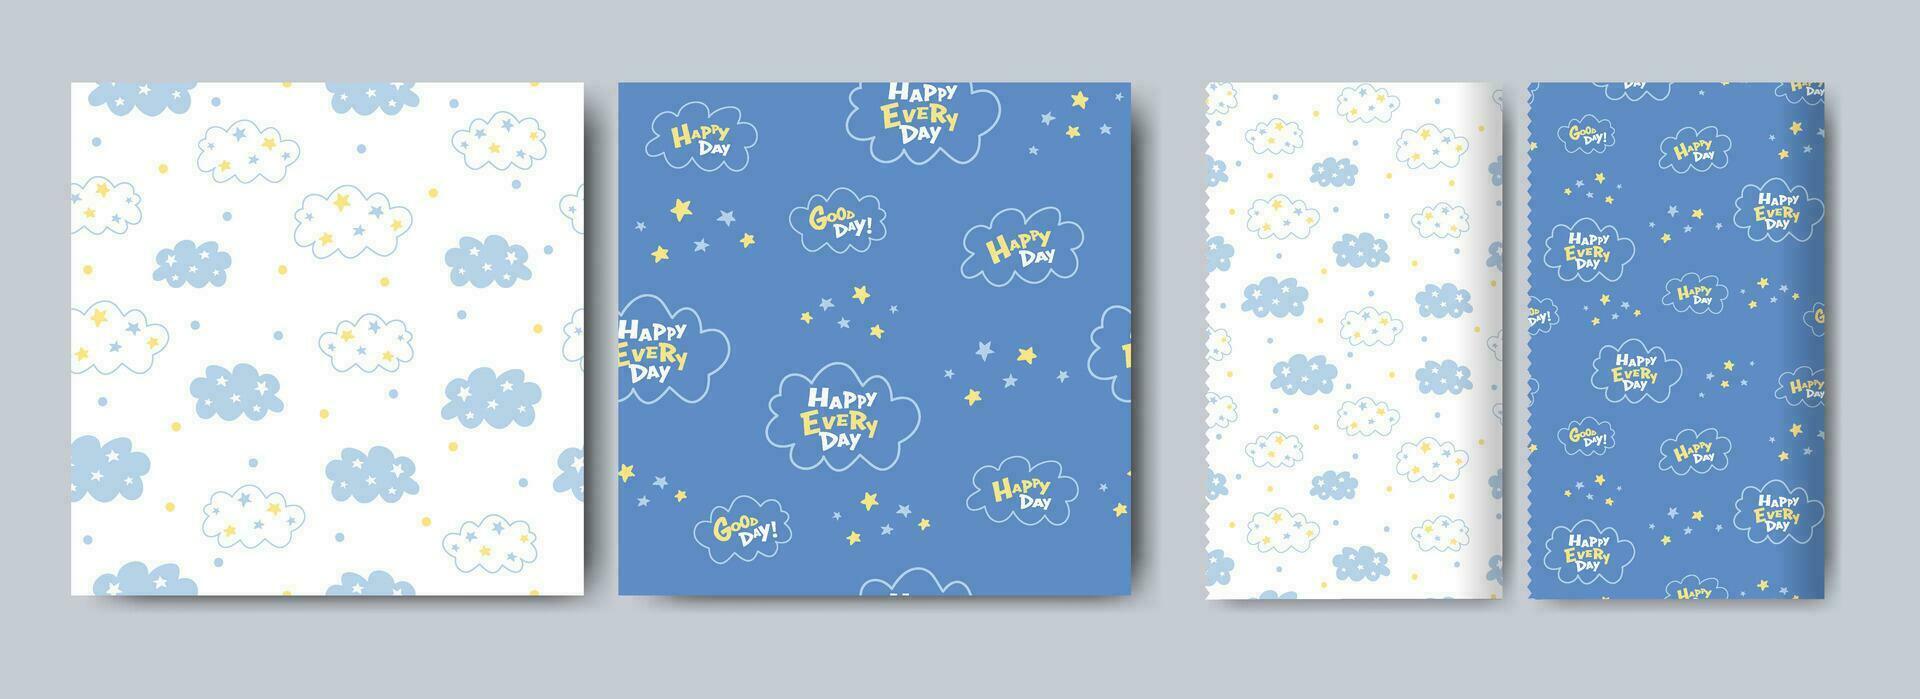 Seamless patterns for kids, cute graphic elements, hand-drawn in children's style used for fabric, textile, print, and decorative wallpaper vector